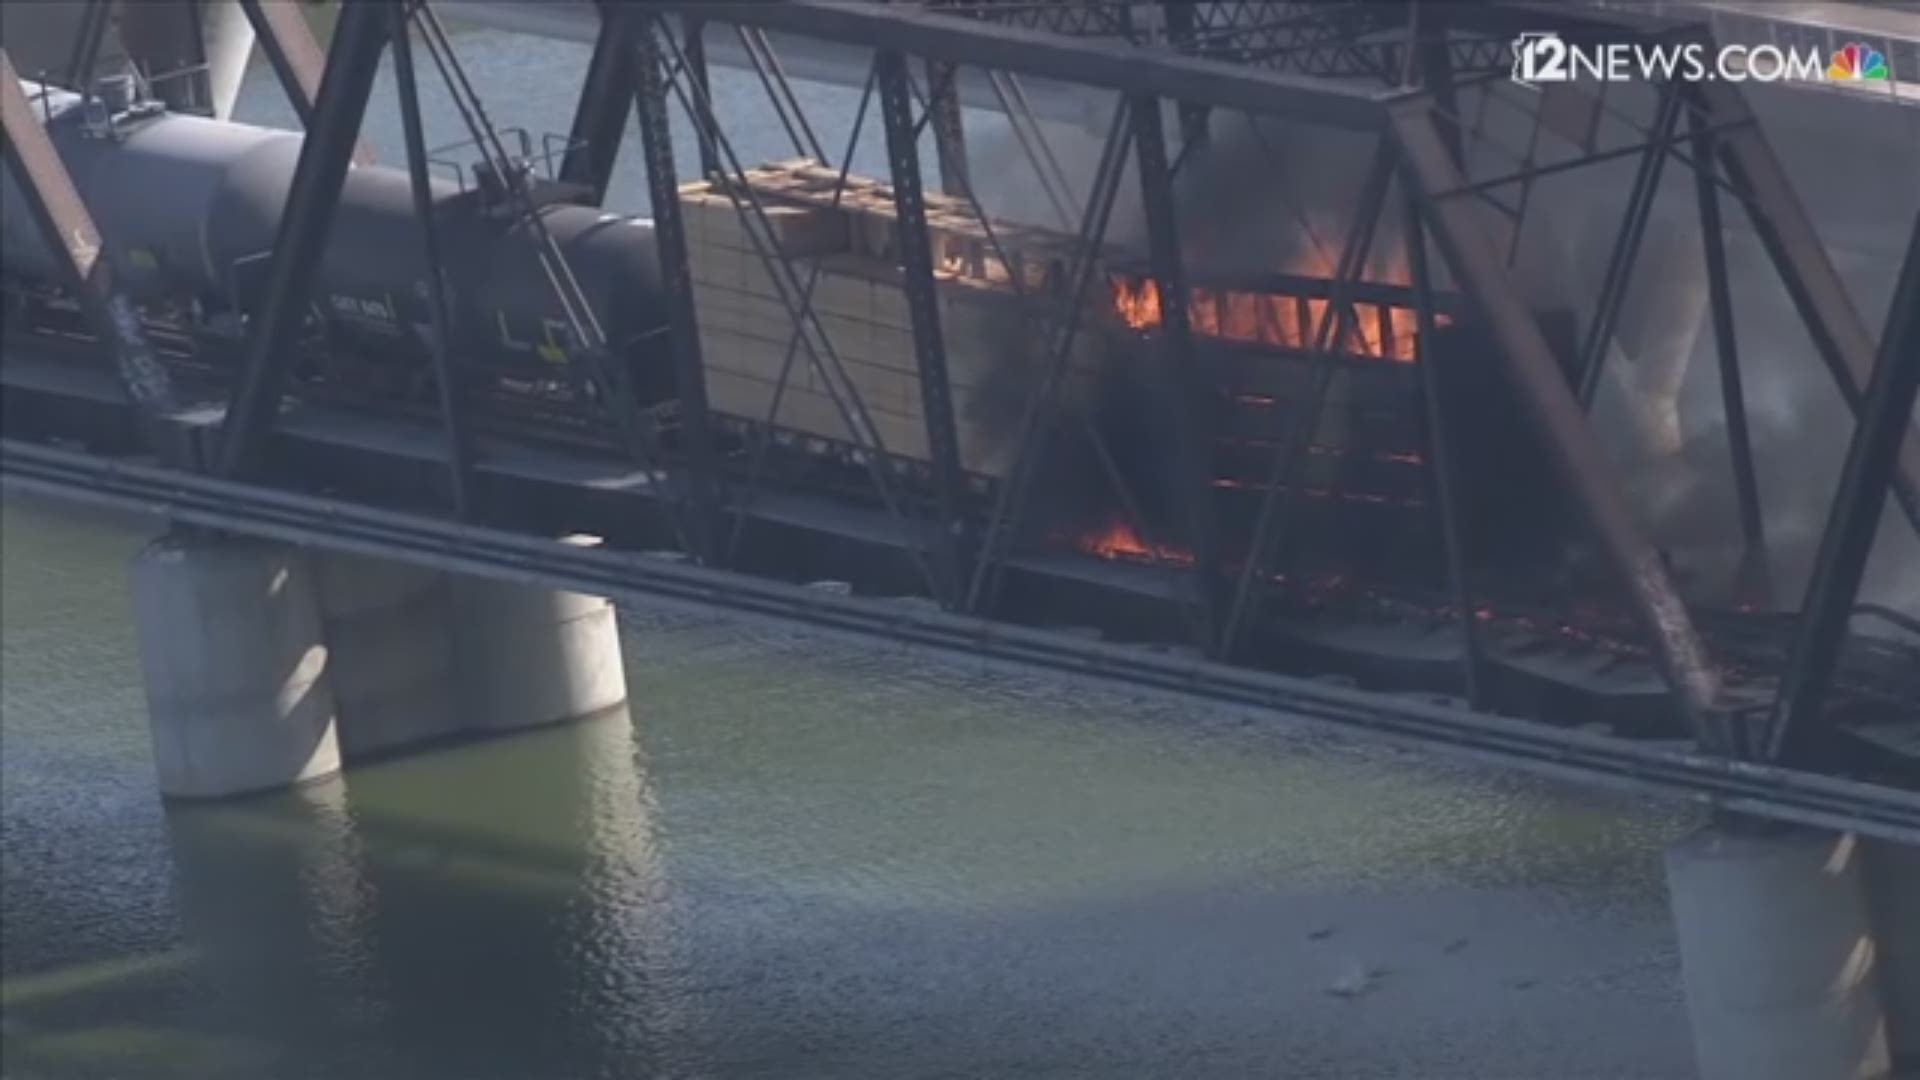 Sky 12 showed a fire burning two hours after a train derailment at Tempe Town Lake. No injuries or fatalities were reported in the incident.